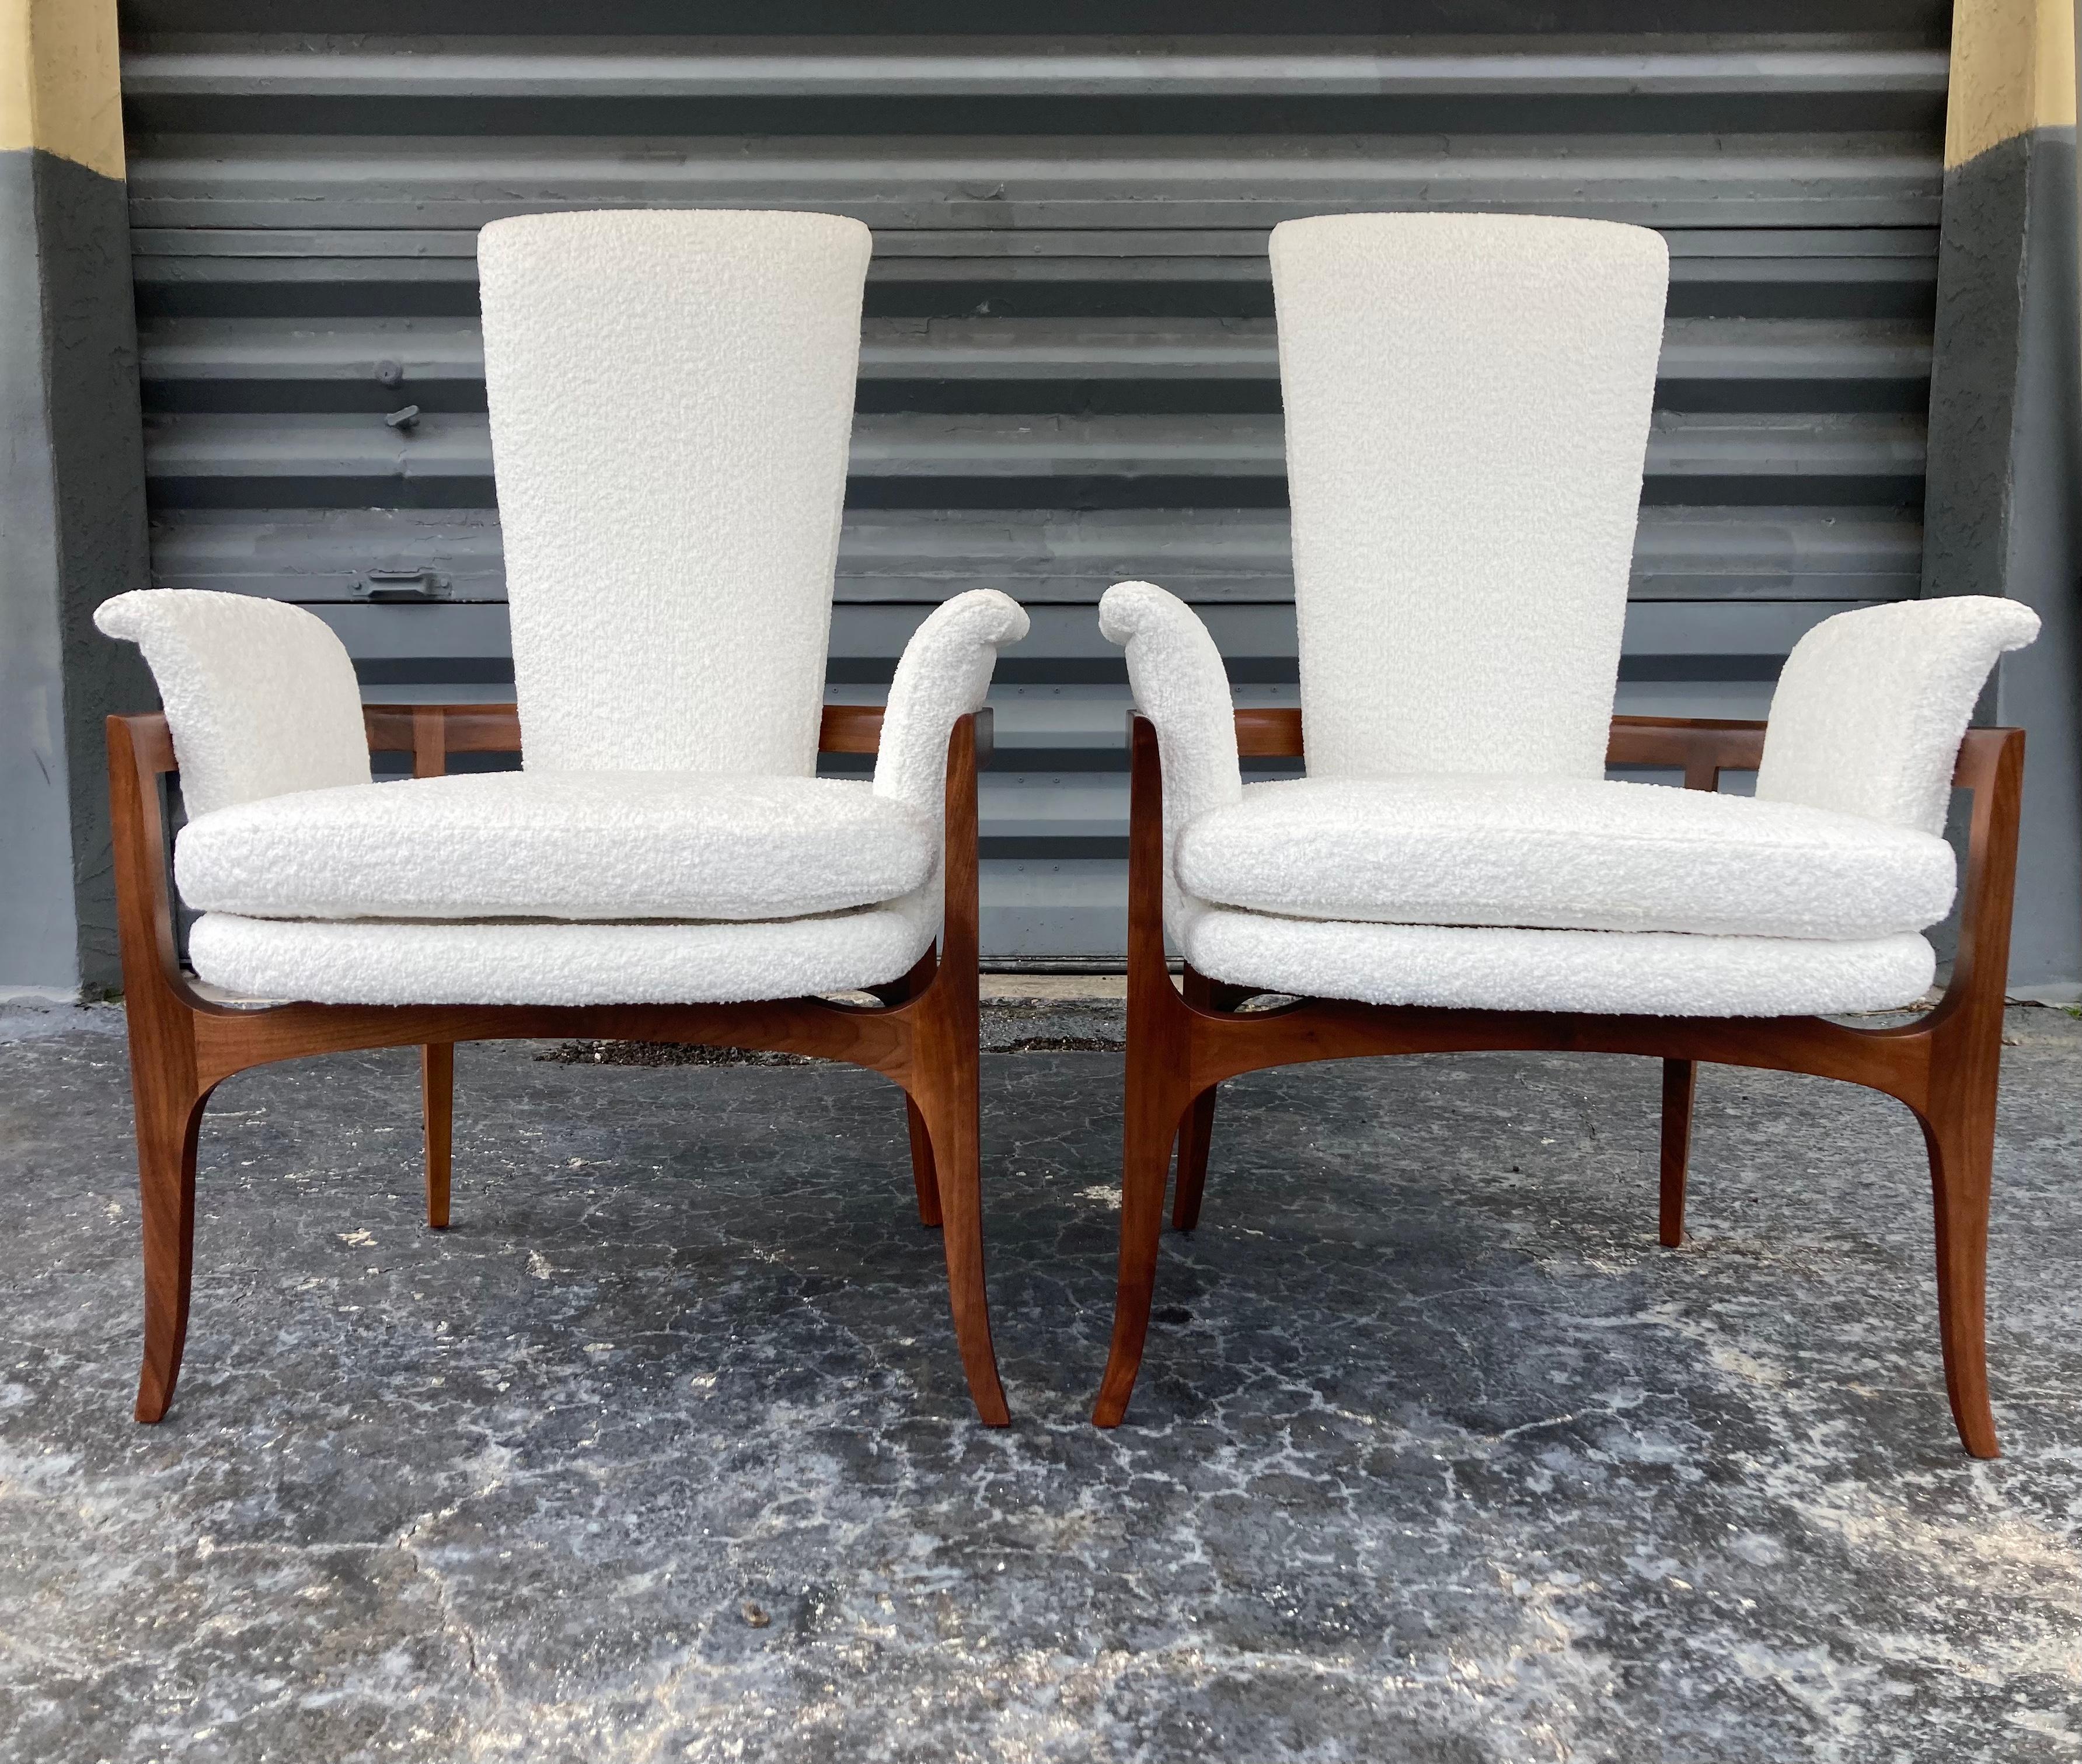 Sculptural Mid-Century Modern Lounge Chairs, Walnut and White Boucle Fabric For Sale 7